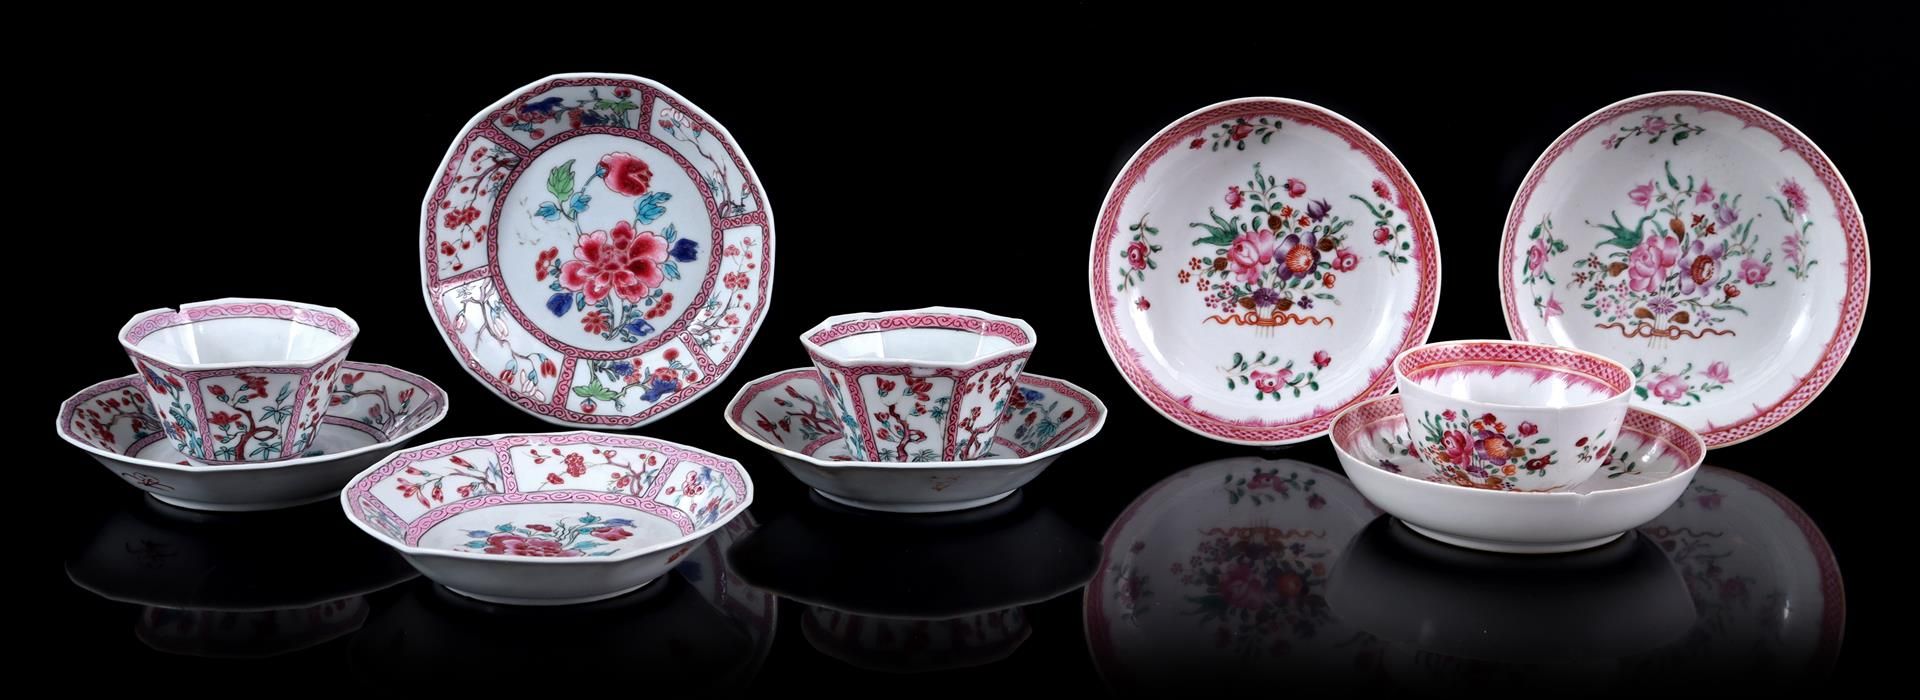 Famille Rose porcelain cups and saucers with floral decor